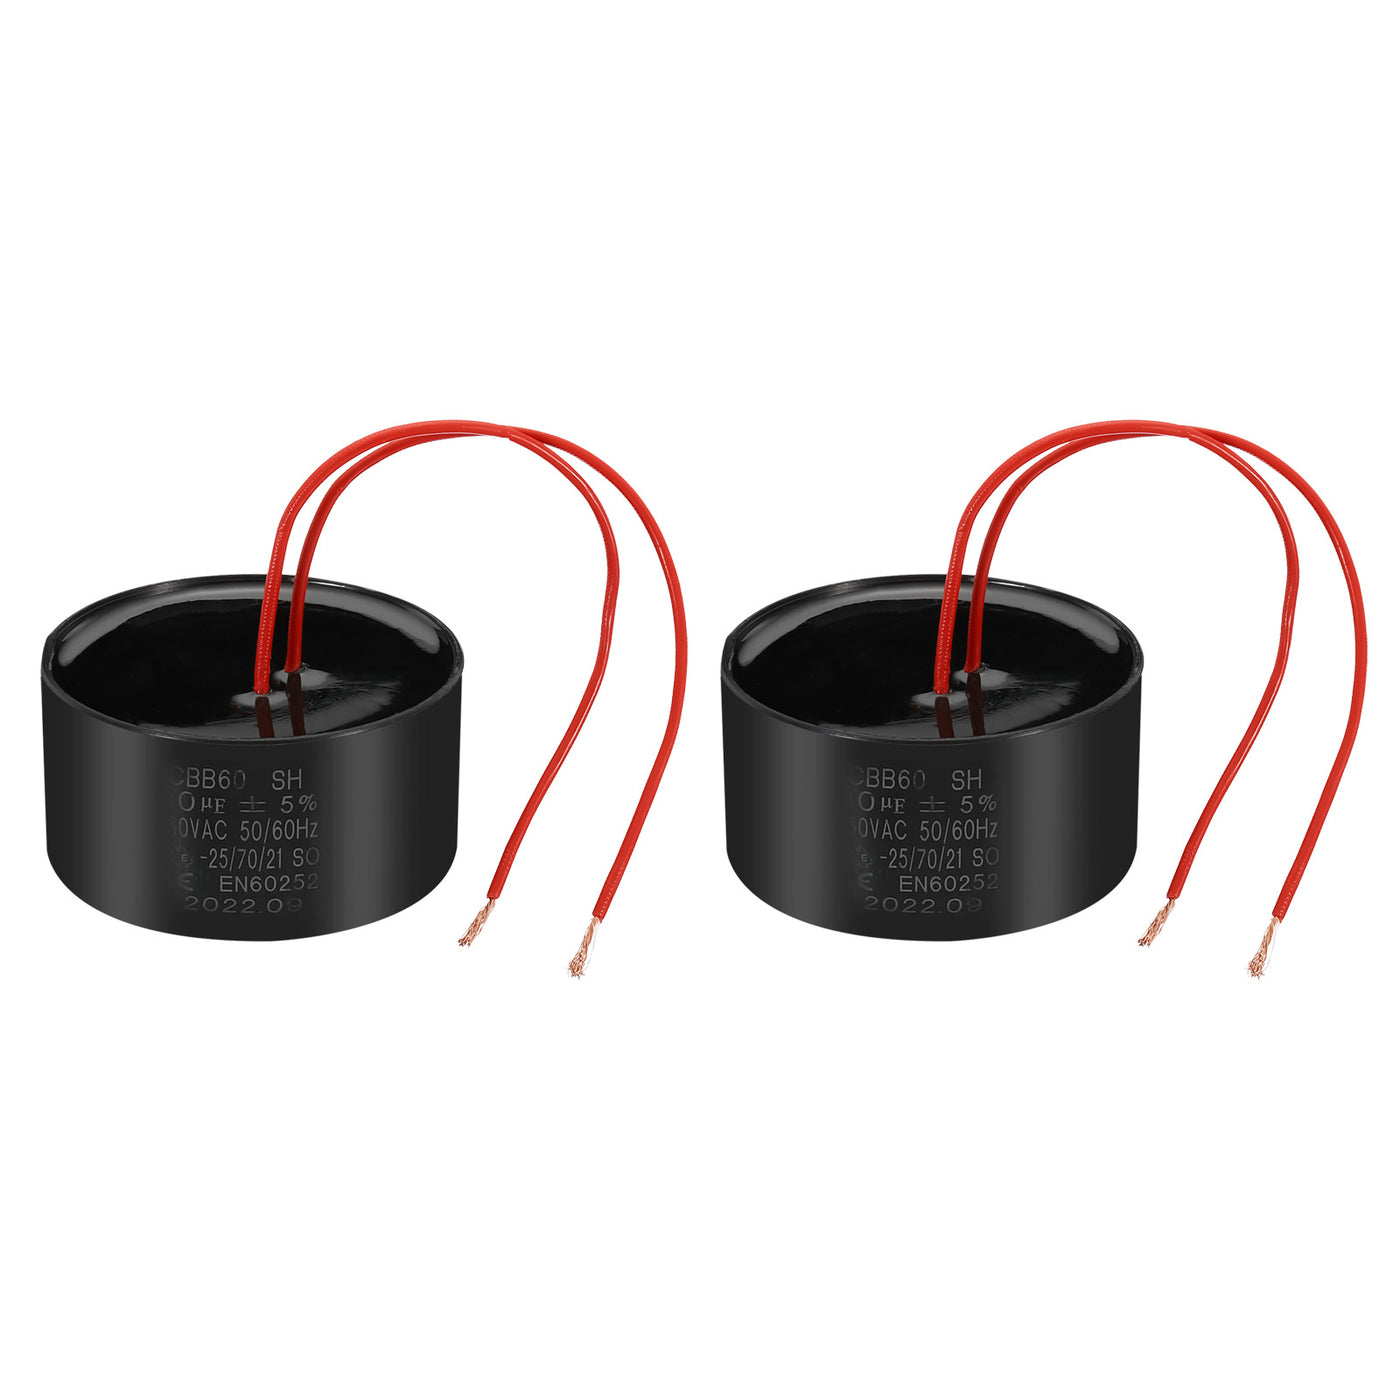 Harfington CBB60 30uf Run Capacitor,2Pcs AC450V 50/60Hz with 2 Red Wires 17cm for Water Pump